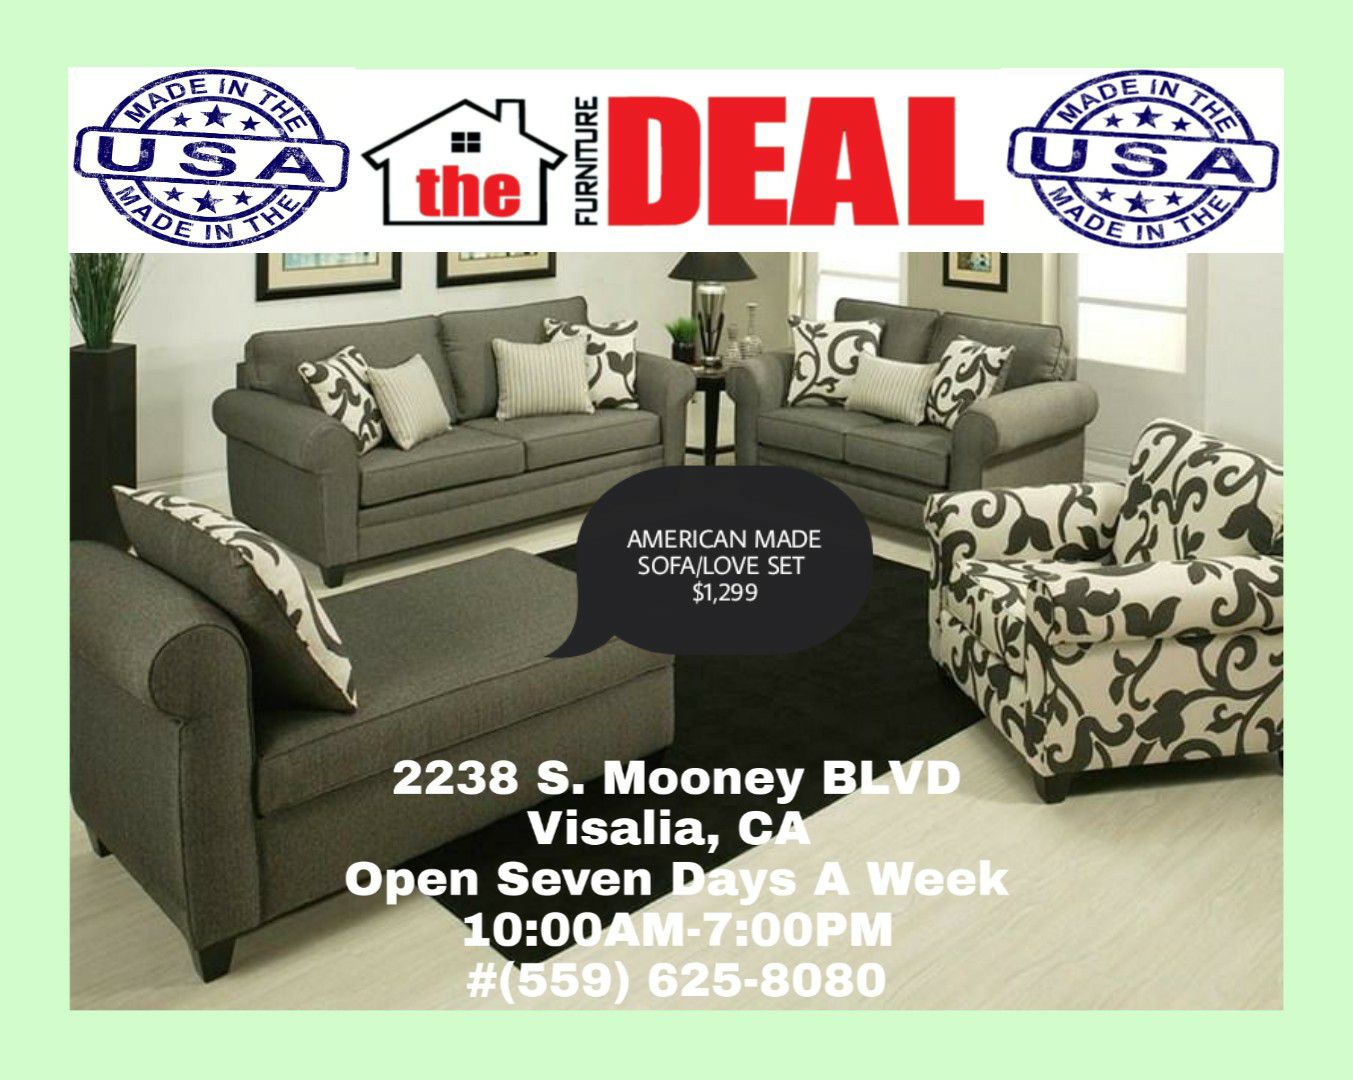 American Sofa/Love set with additional pieces available